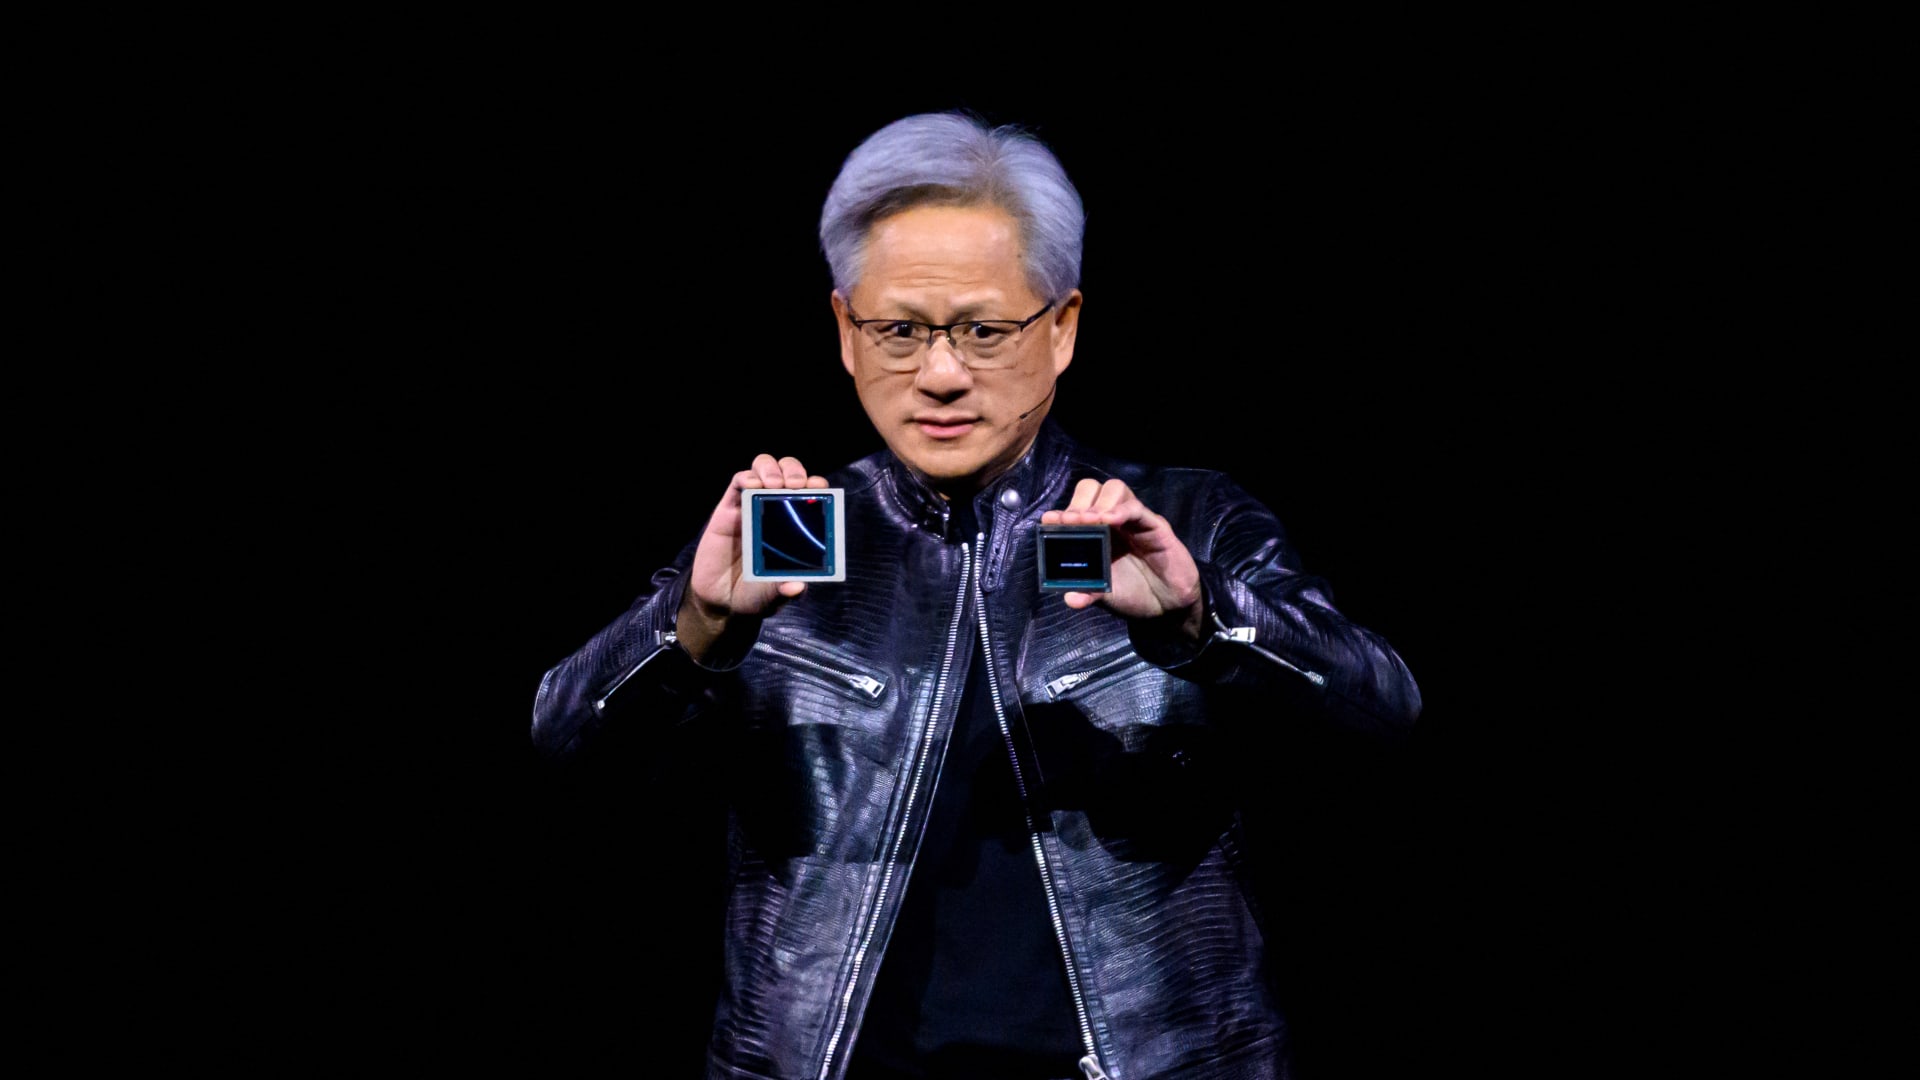 Now that Nvidia’s launched powerful AI chips, Goldman expects these 3 stocks to get a boost